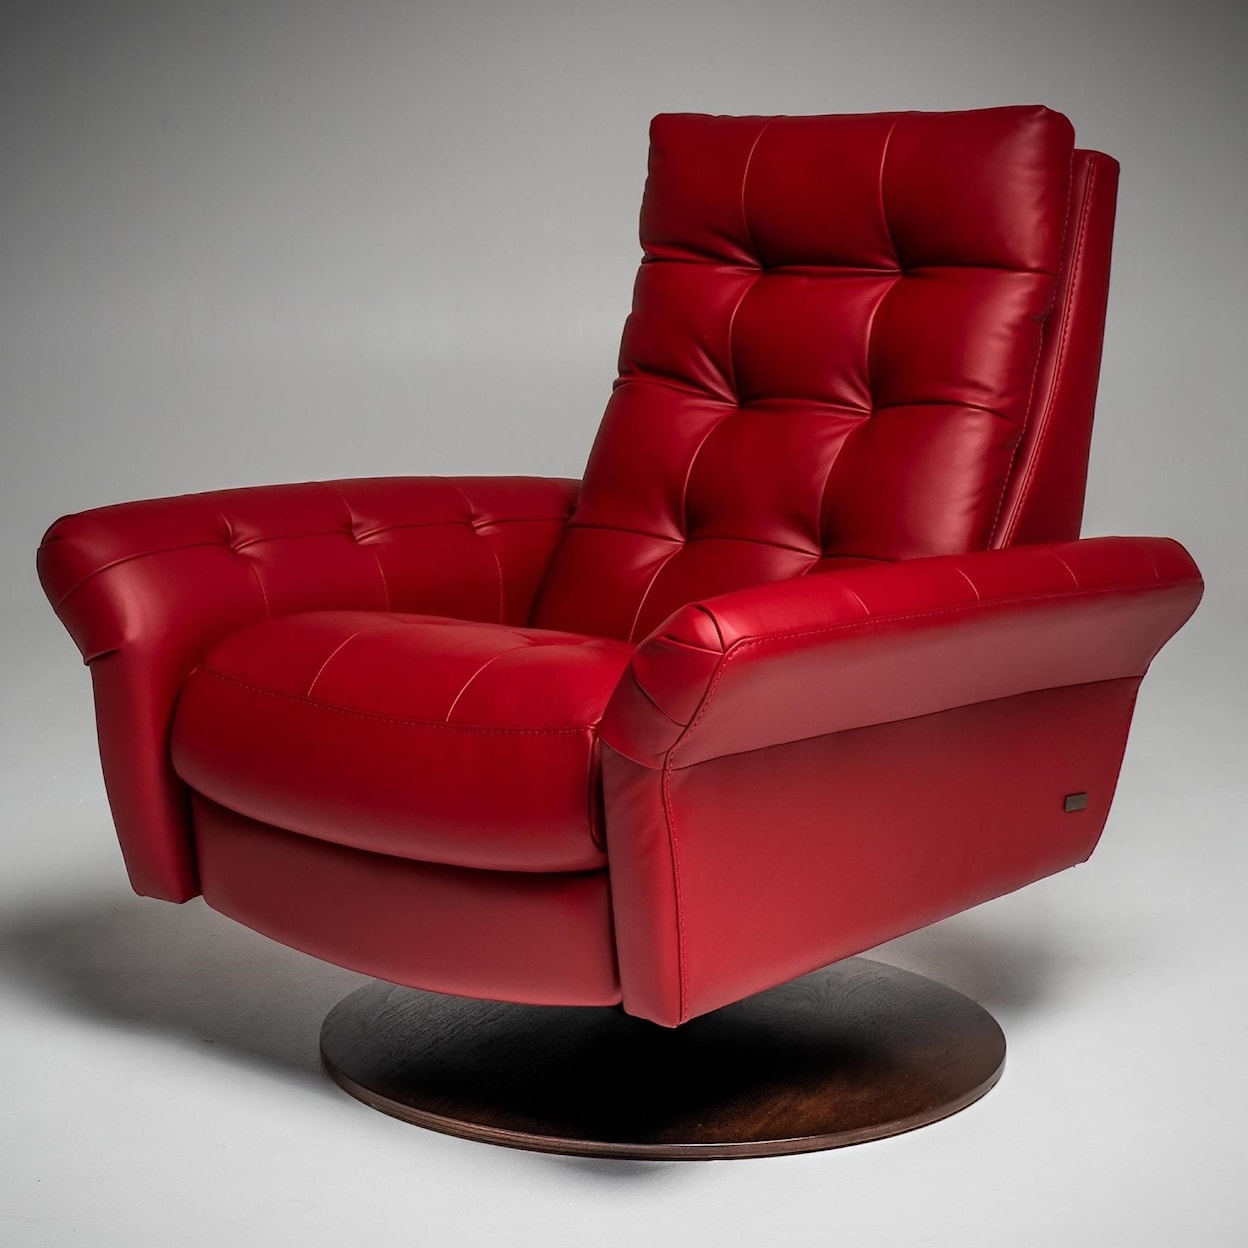 American Leather Pileus Swivel Glider Recliner - Extra Large